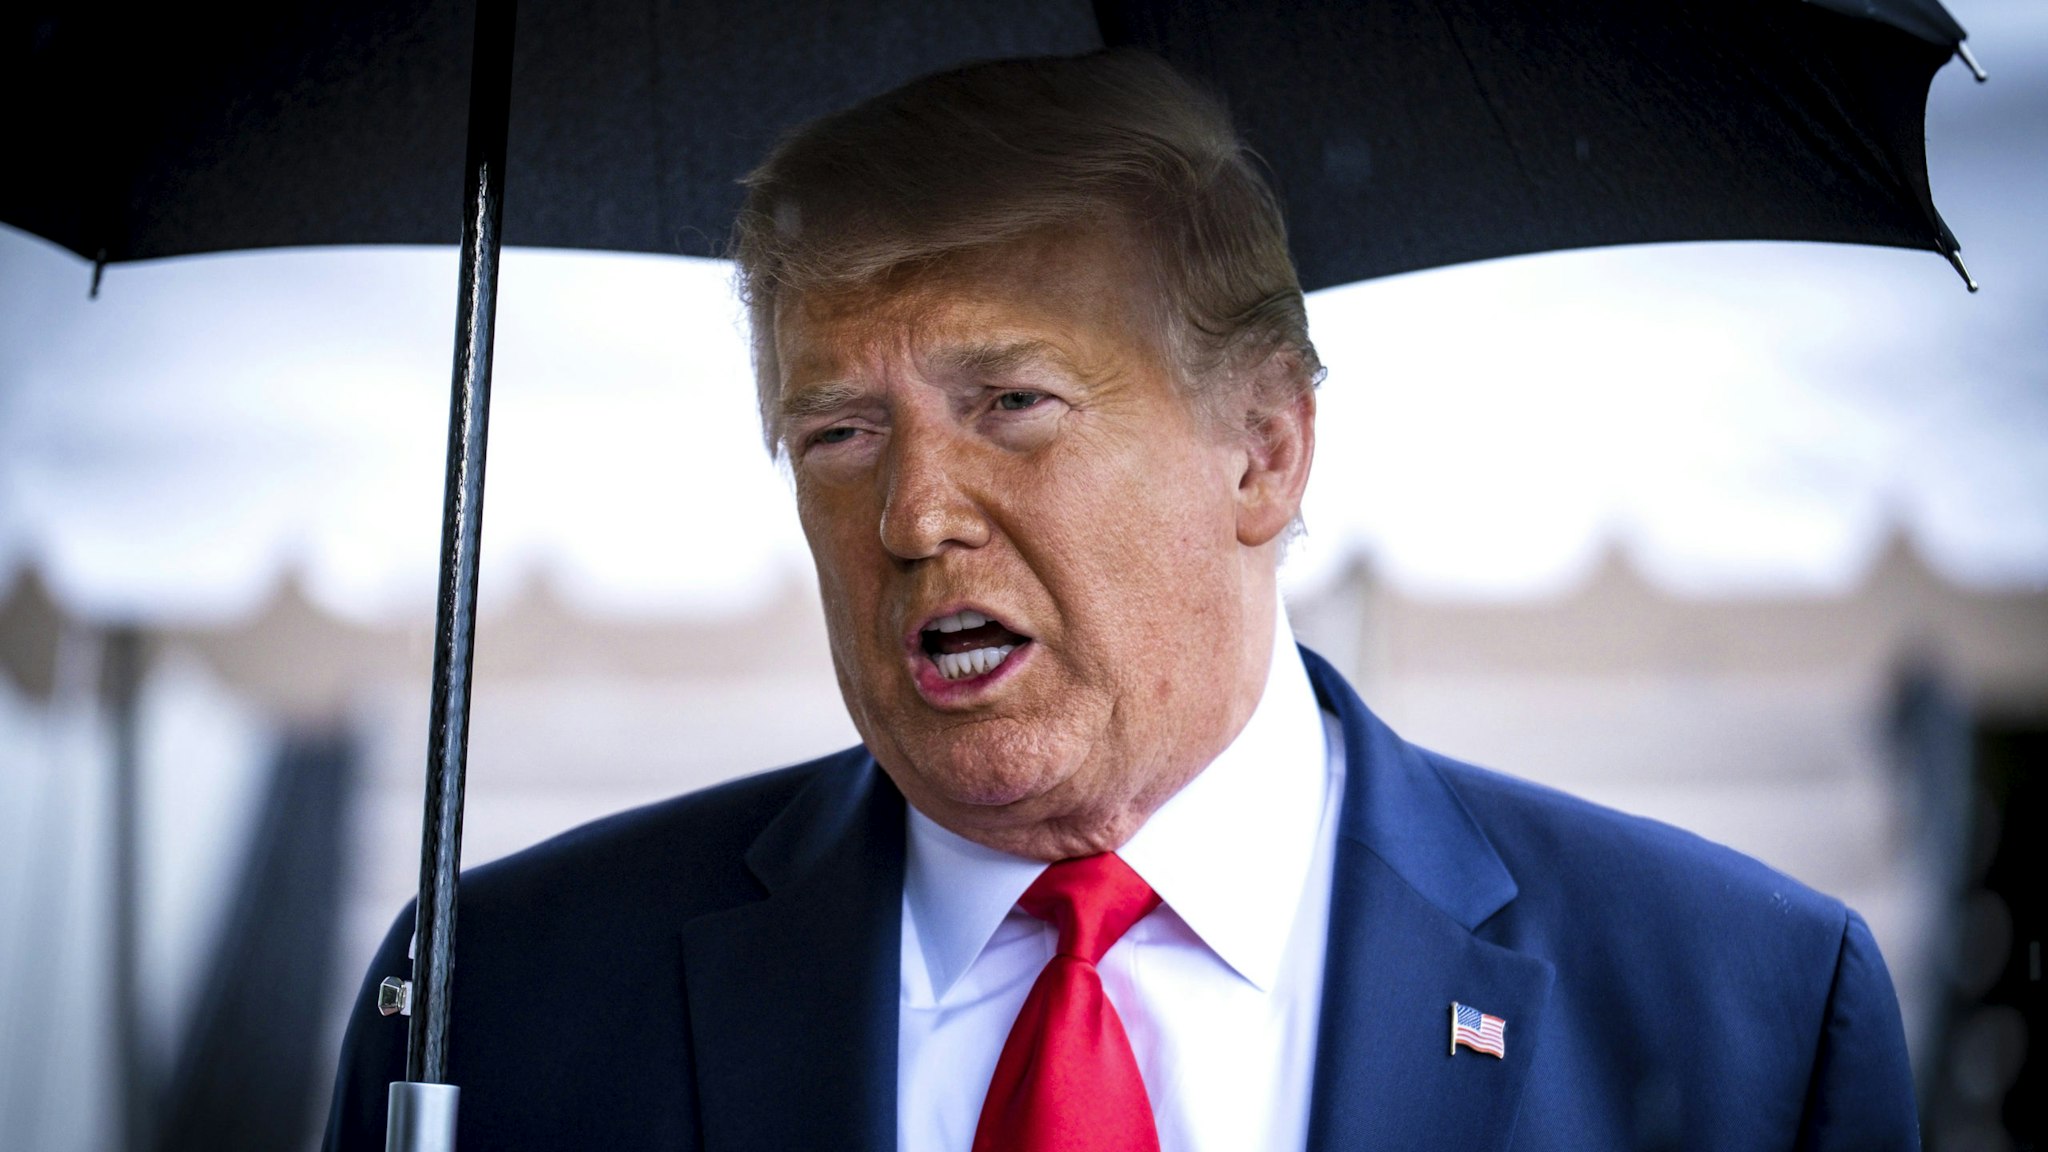 WASHINGTON, DC - JUNE 20:President Donald Trump stops to speak to the media in the rain on the South Lawn of the White House as he prepares to depart aboard Marine One for a rally in Tulsa, OK, on June 20, 2020 in Washington, DC. The rally is Trump's first in months since the coronavirus lockdown and his campaign acknowledged that six staff members had tested positive for the virus during routine screening.